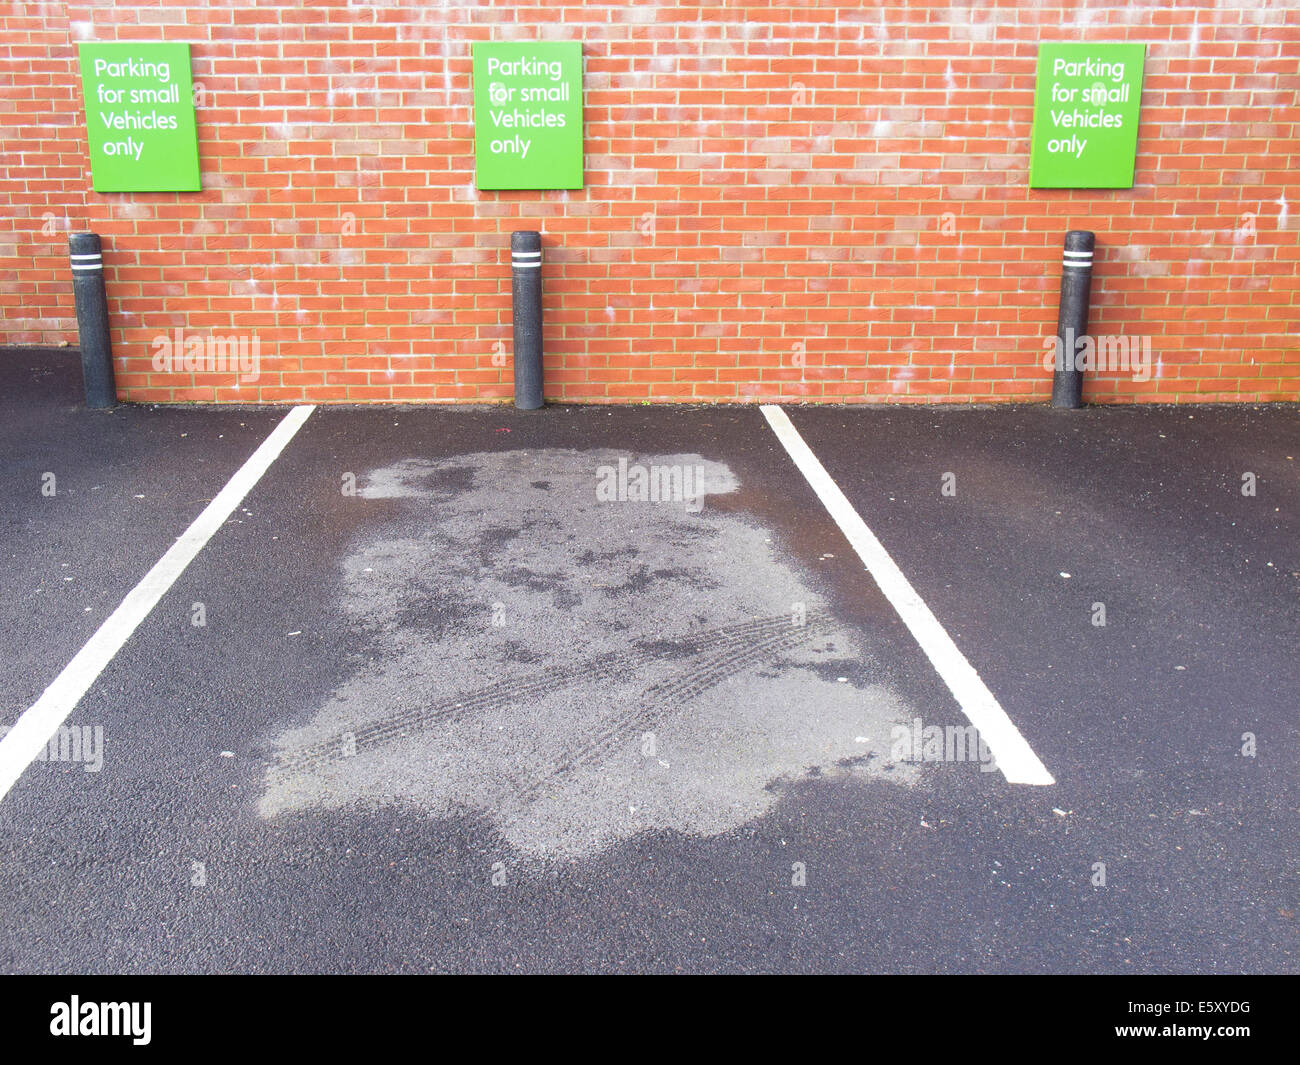 Car Parking spaces for small vehicles only Stock Photo